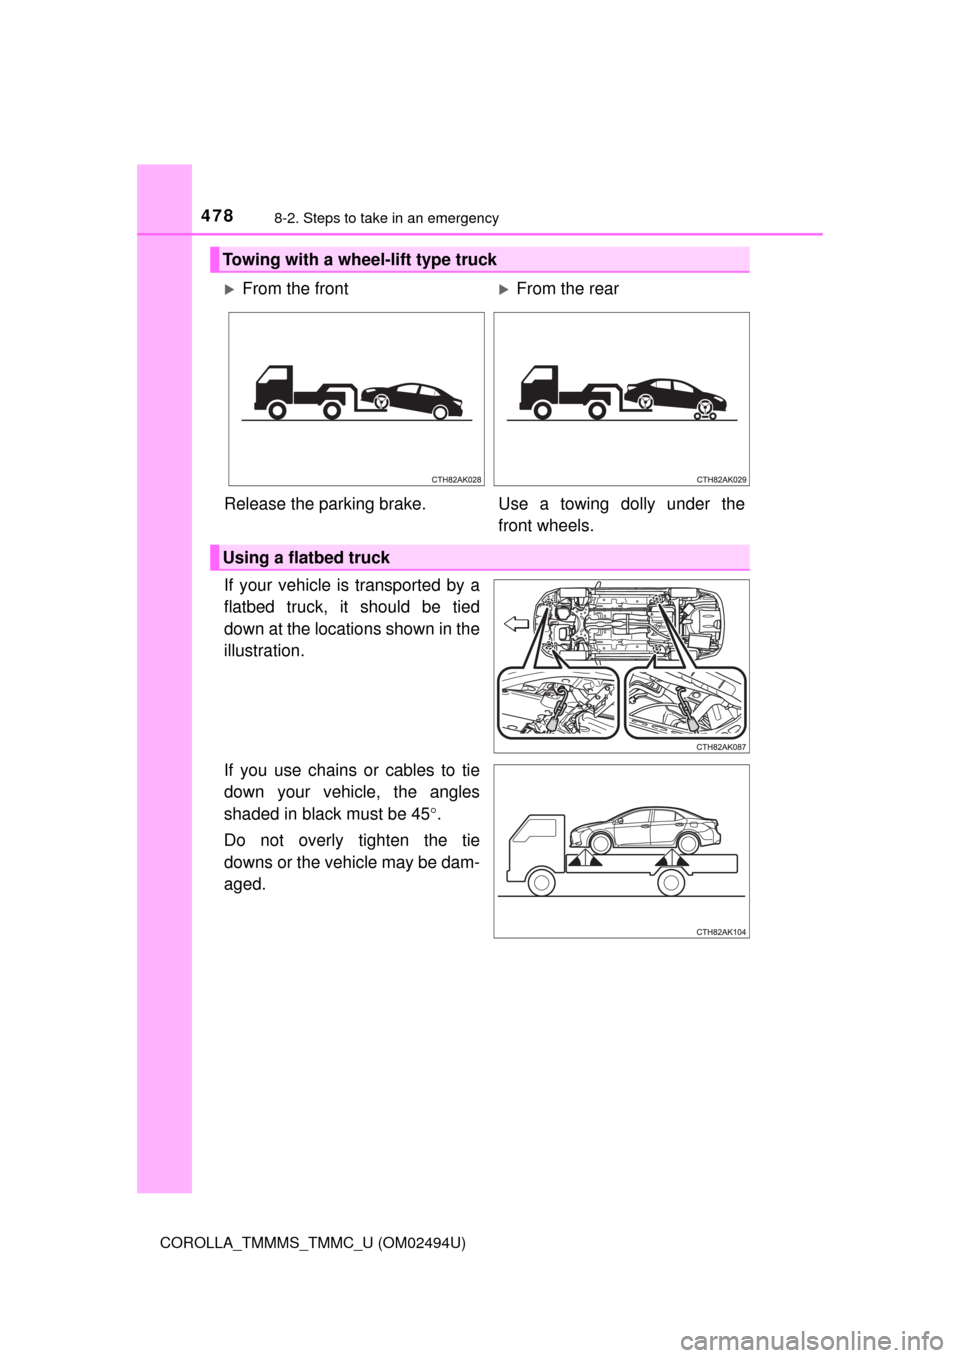 TOYOTA COROLLA 2017 11.G User Guide 4788-2. Steps to take in an emergency
COROLLA_TMMMS_TMMC_U (OM02494U)
If your vehicle is transported by a
flatbed truck, it should be tied
down at the locations shown in the
illustration.
If you use c